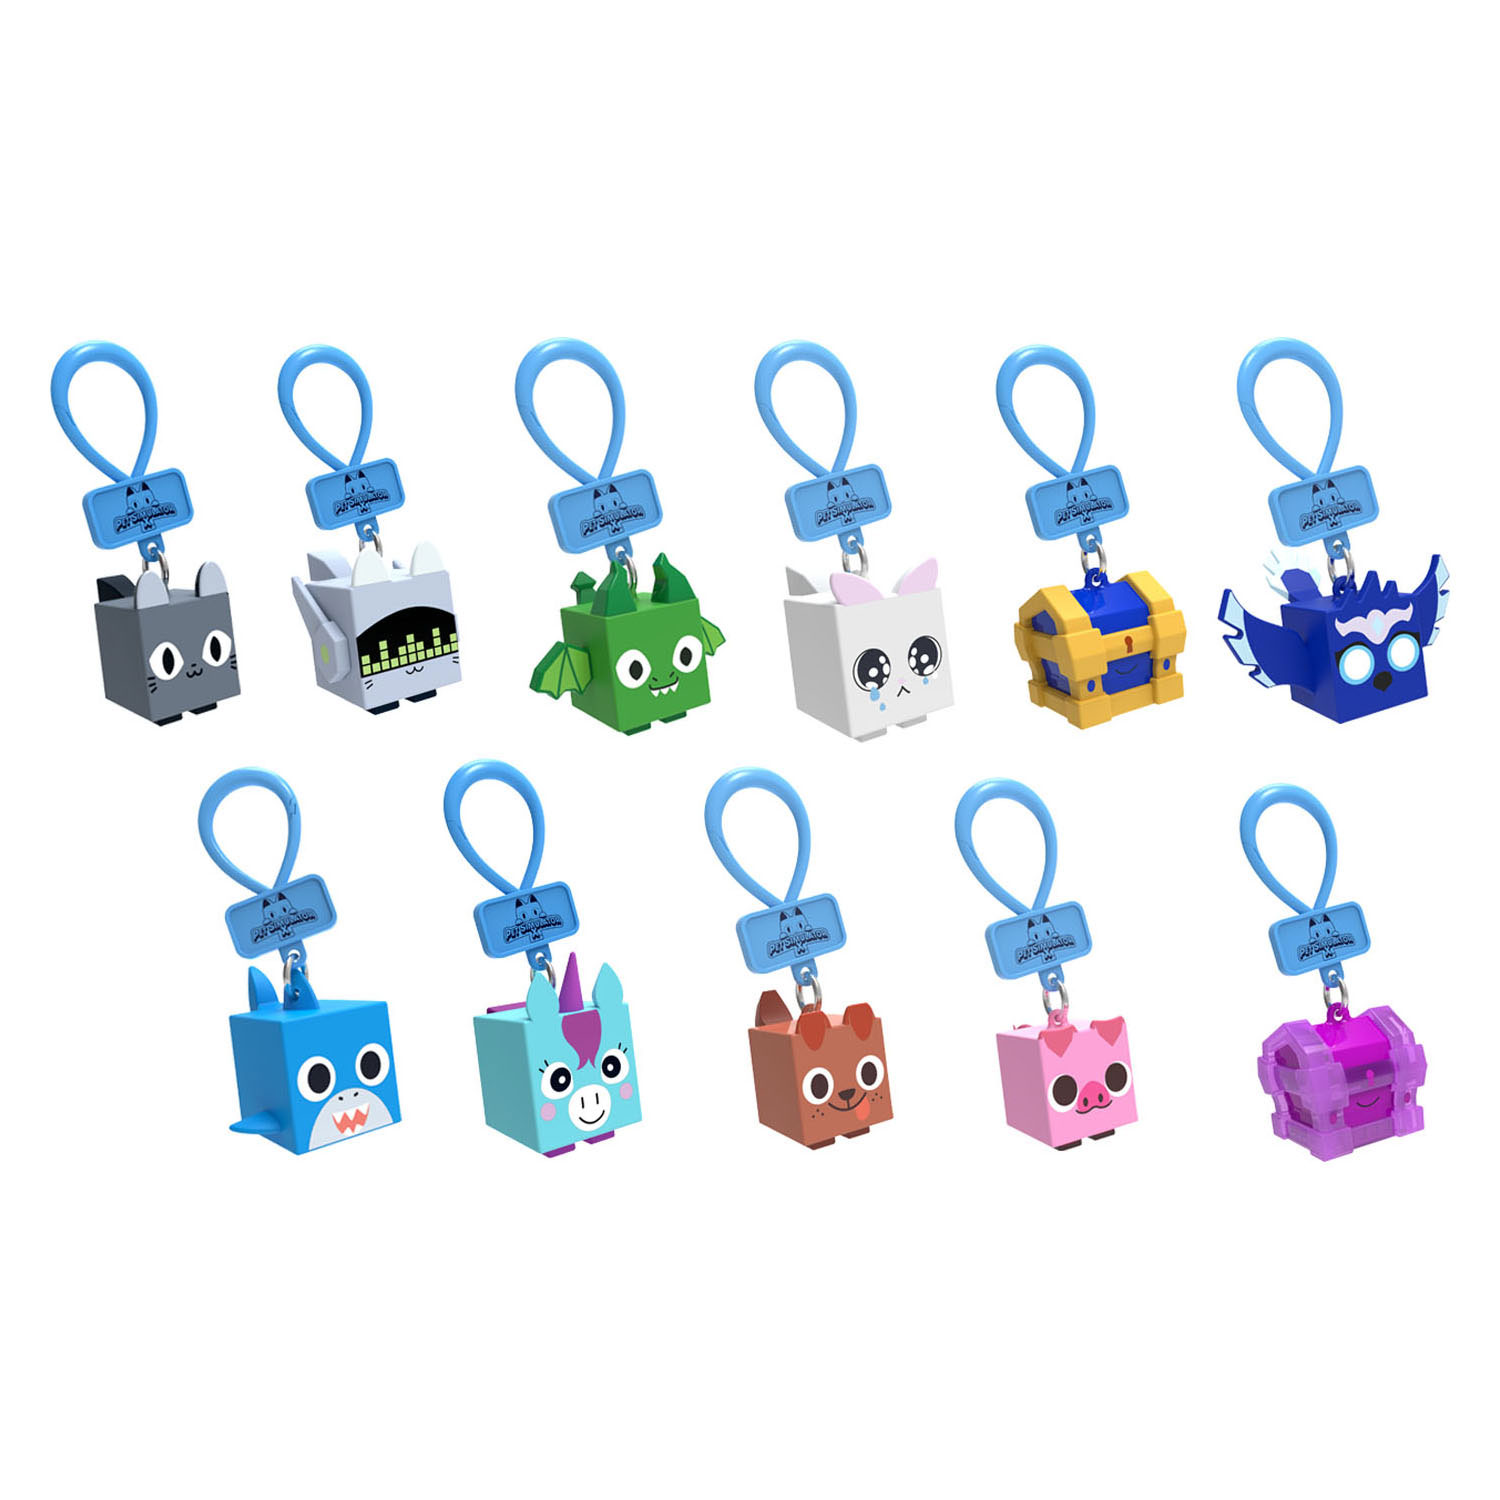 Roblox Pet Simulator X Series 1 Collector Clip Mystery Box (24 Packs) 